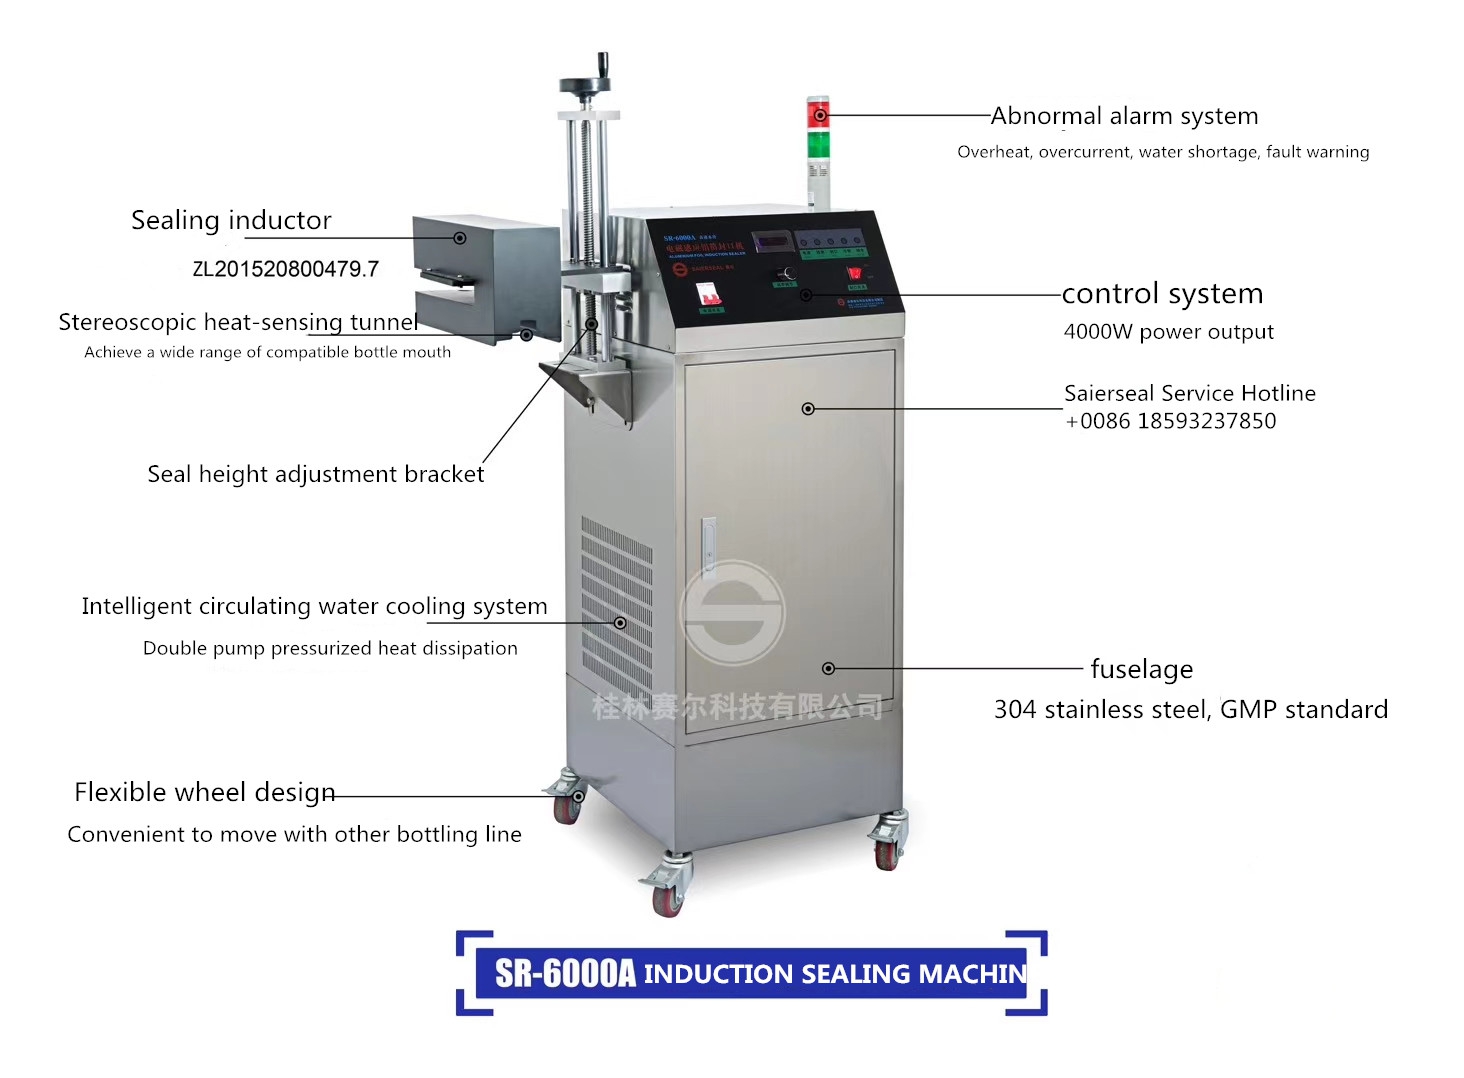 Induction Sealing Machine by GLSEAL